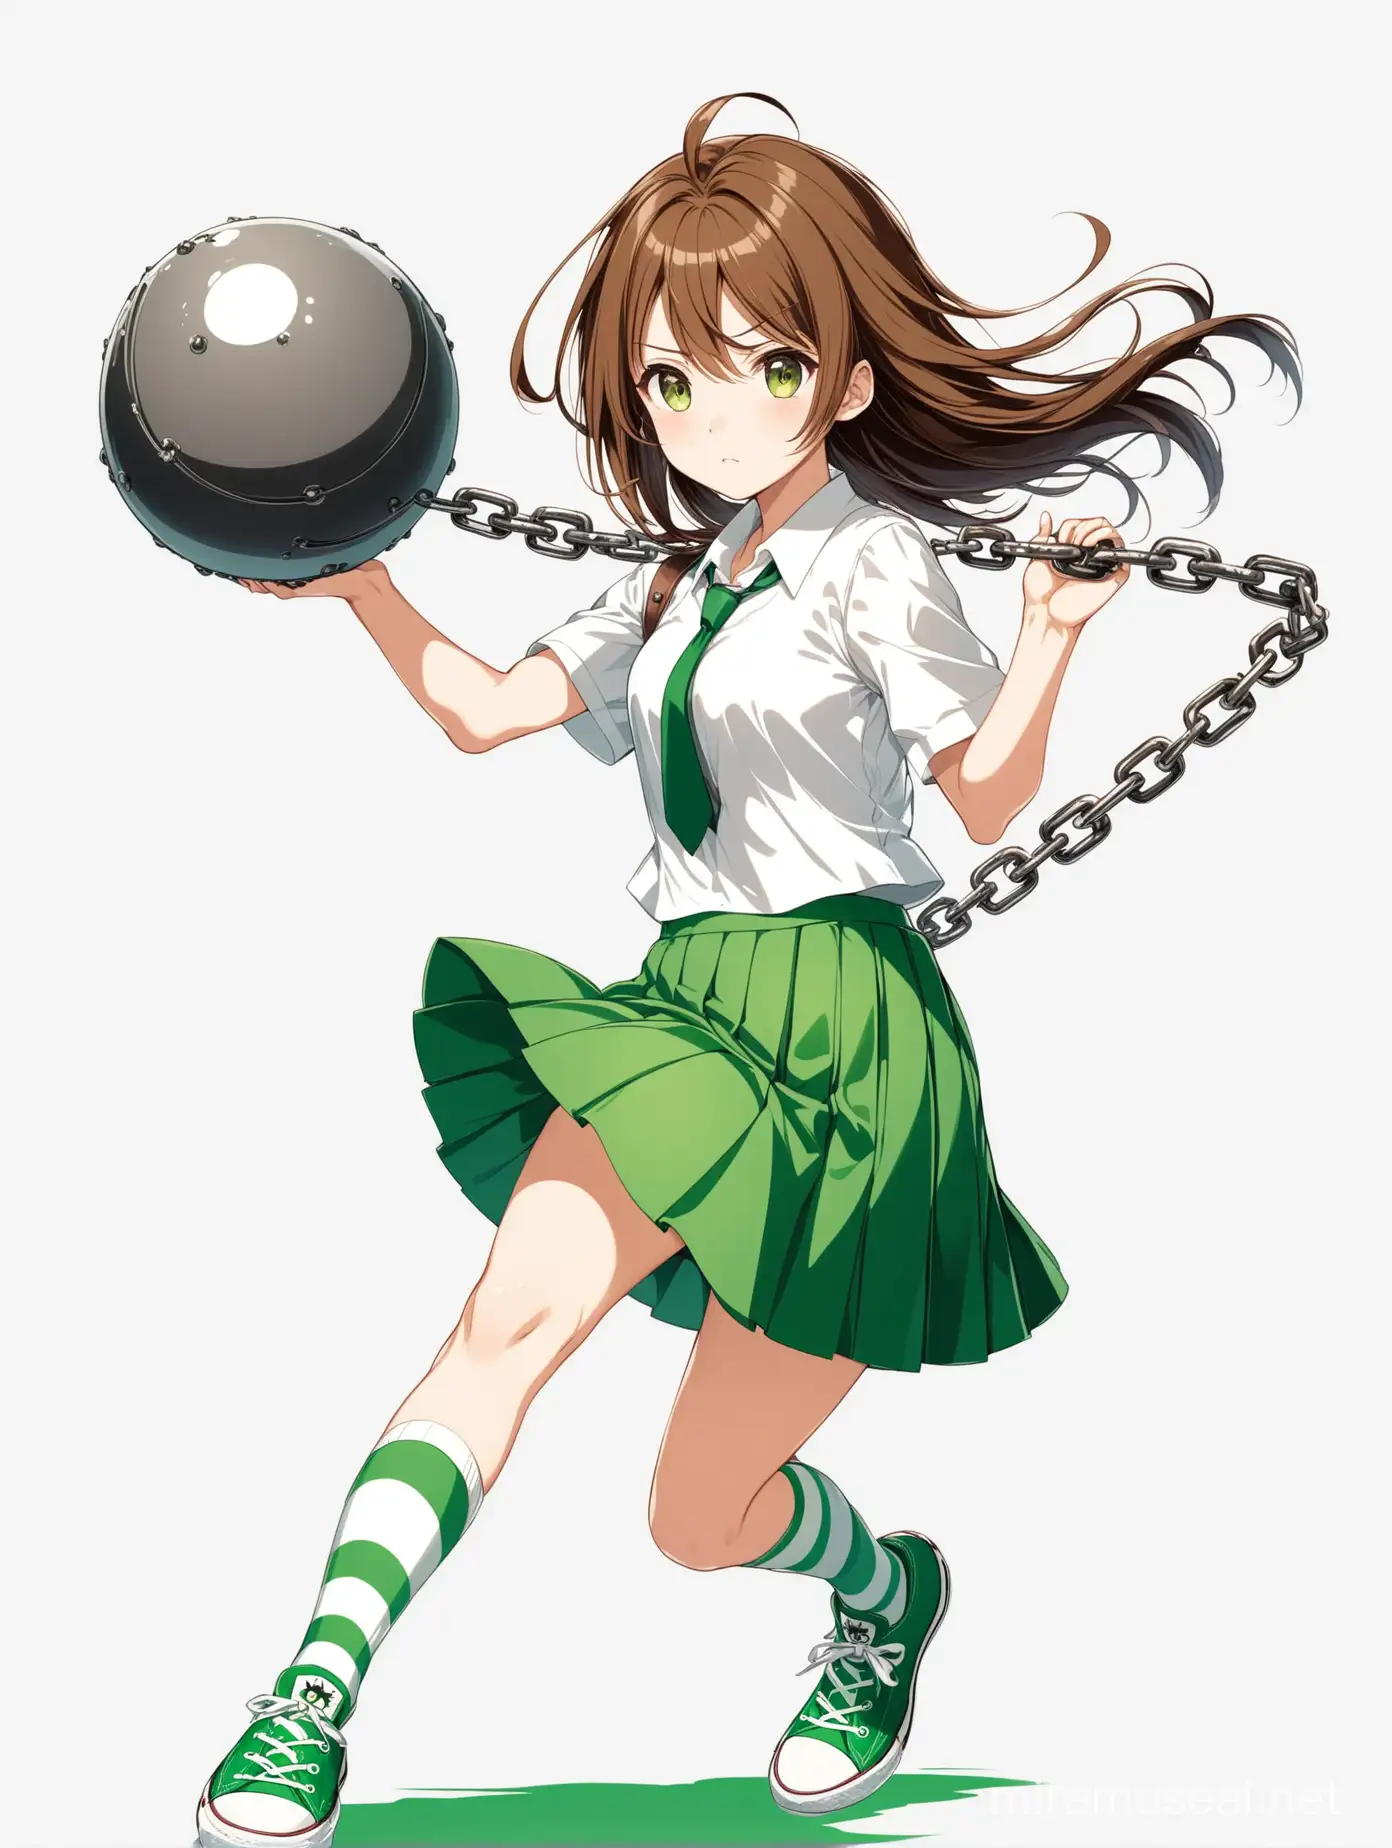 Anime High School Girl with Chain Weapon in Uniform